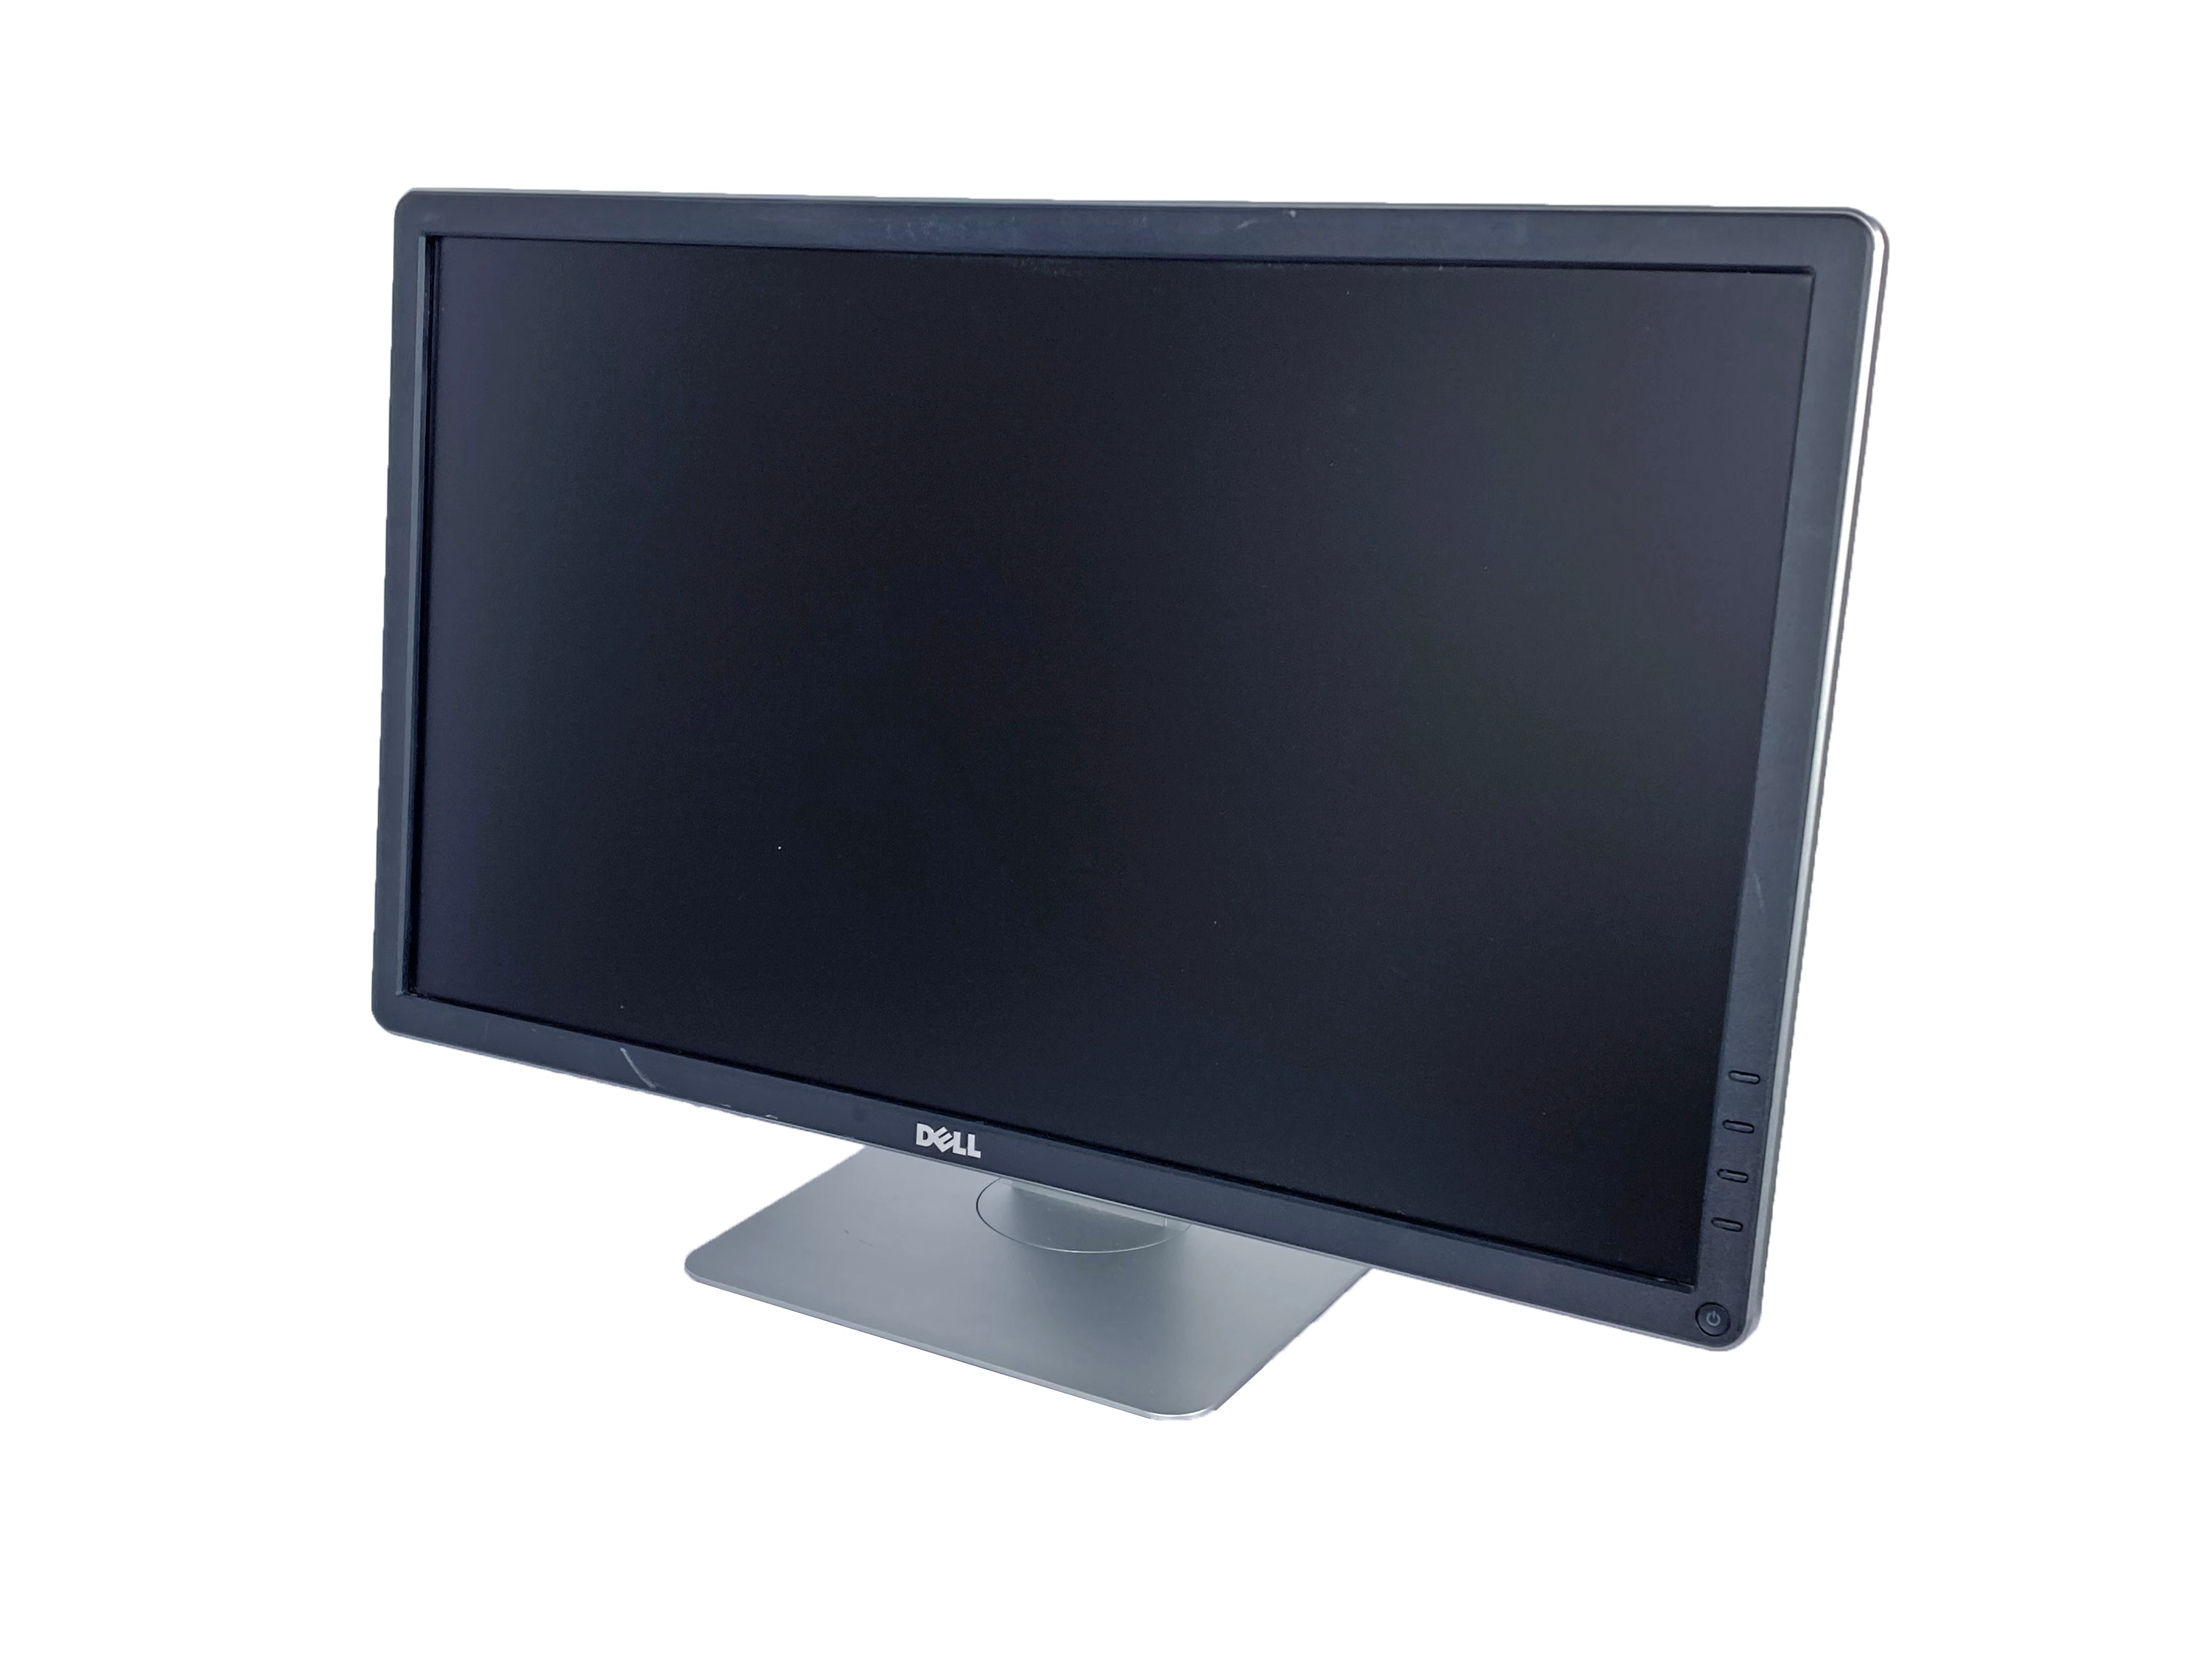 Dell P2414Hb 24" Widescreen LED Backlit Monitor